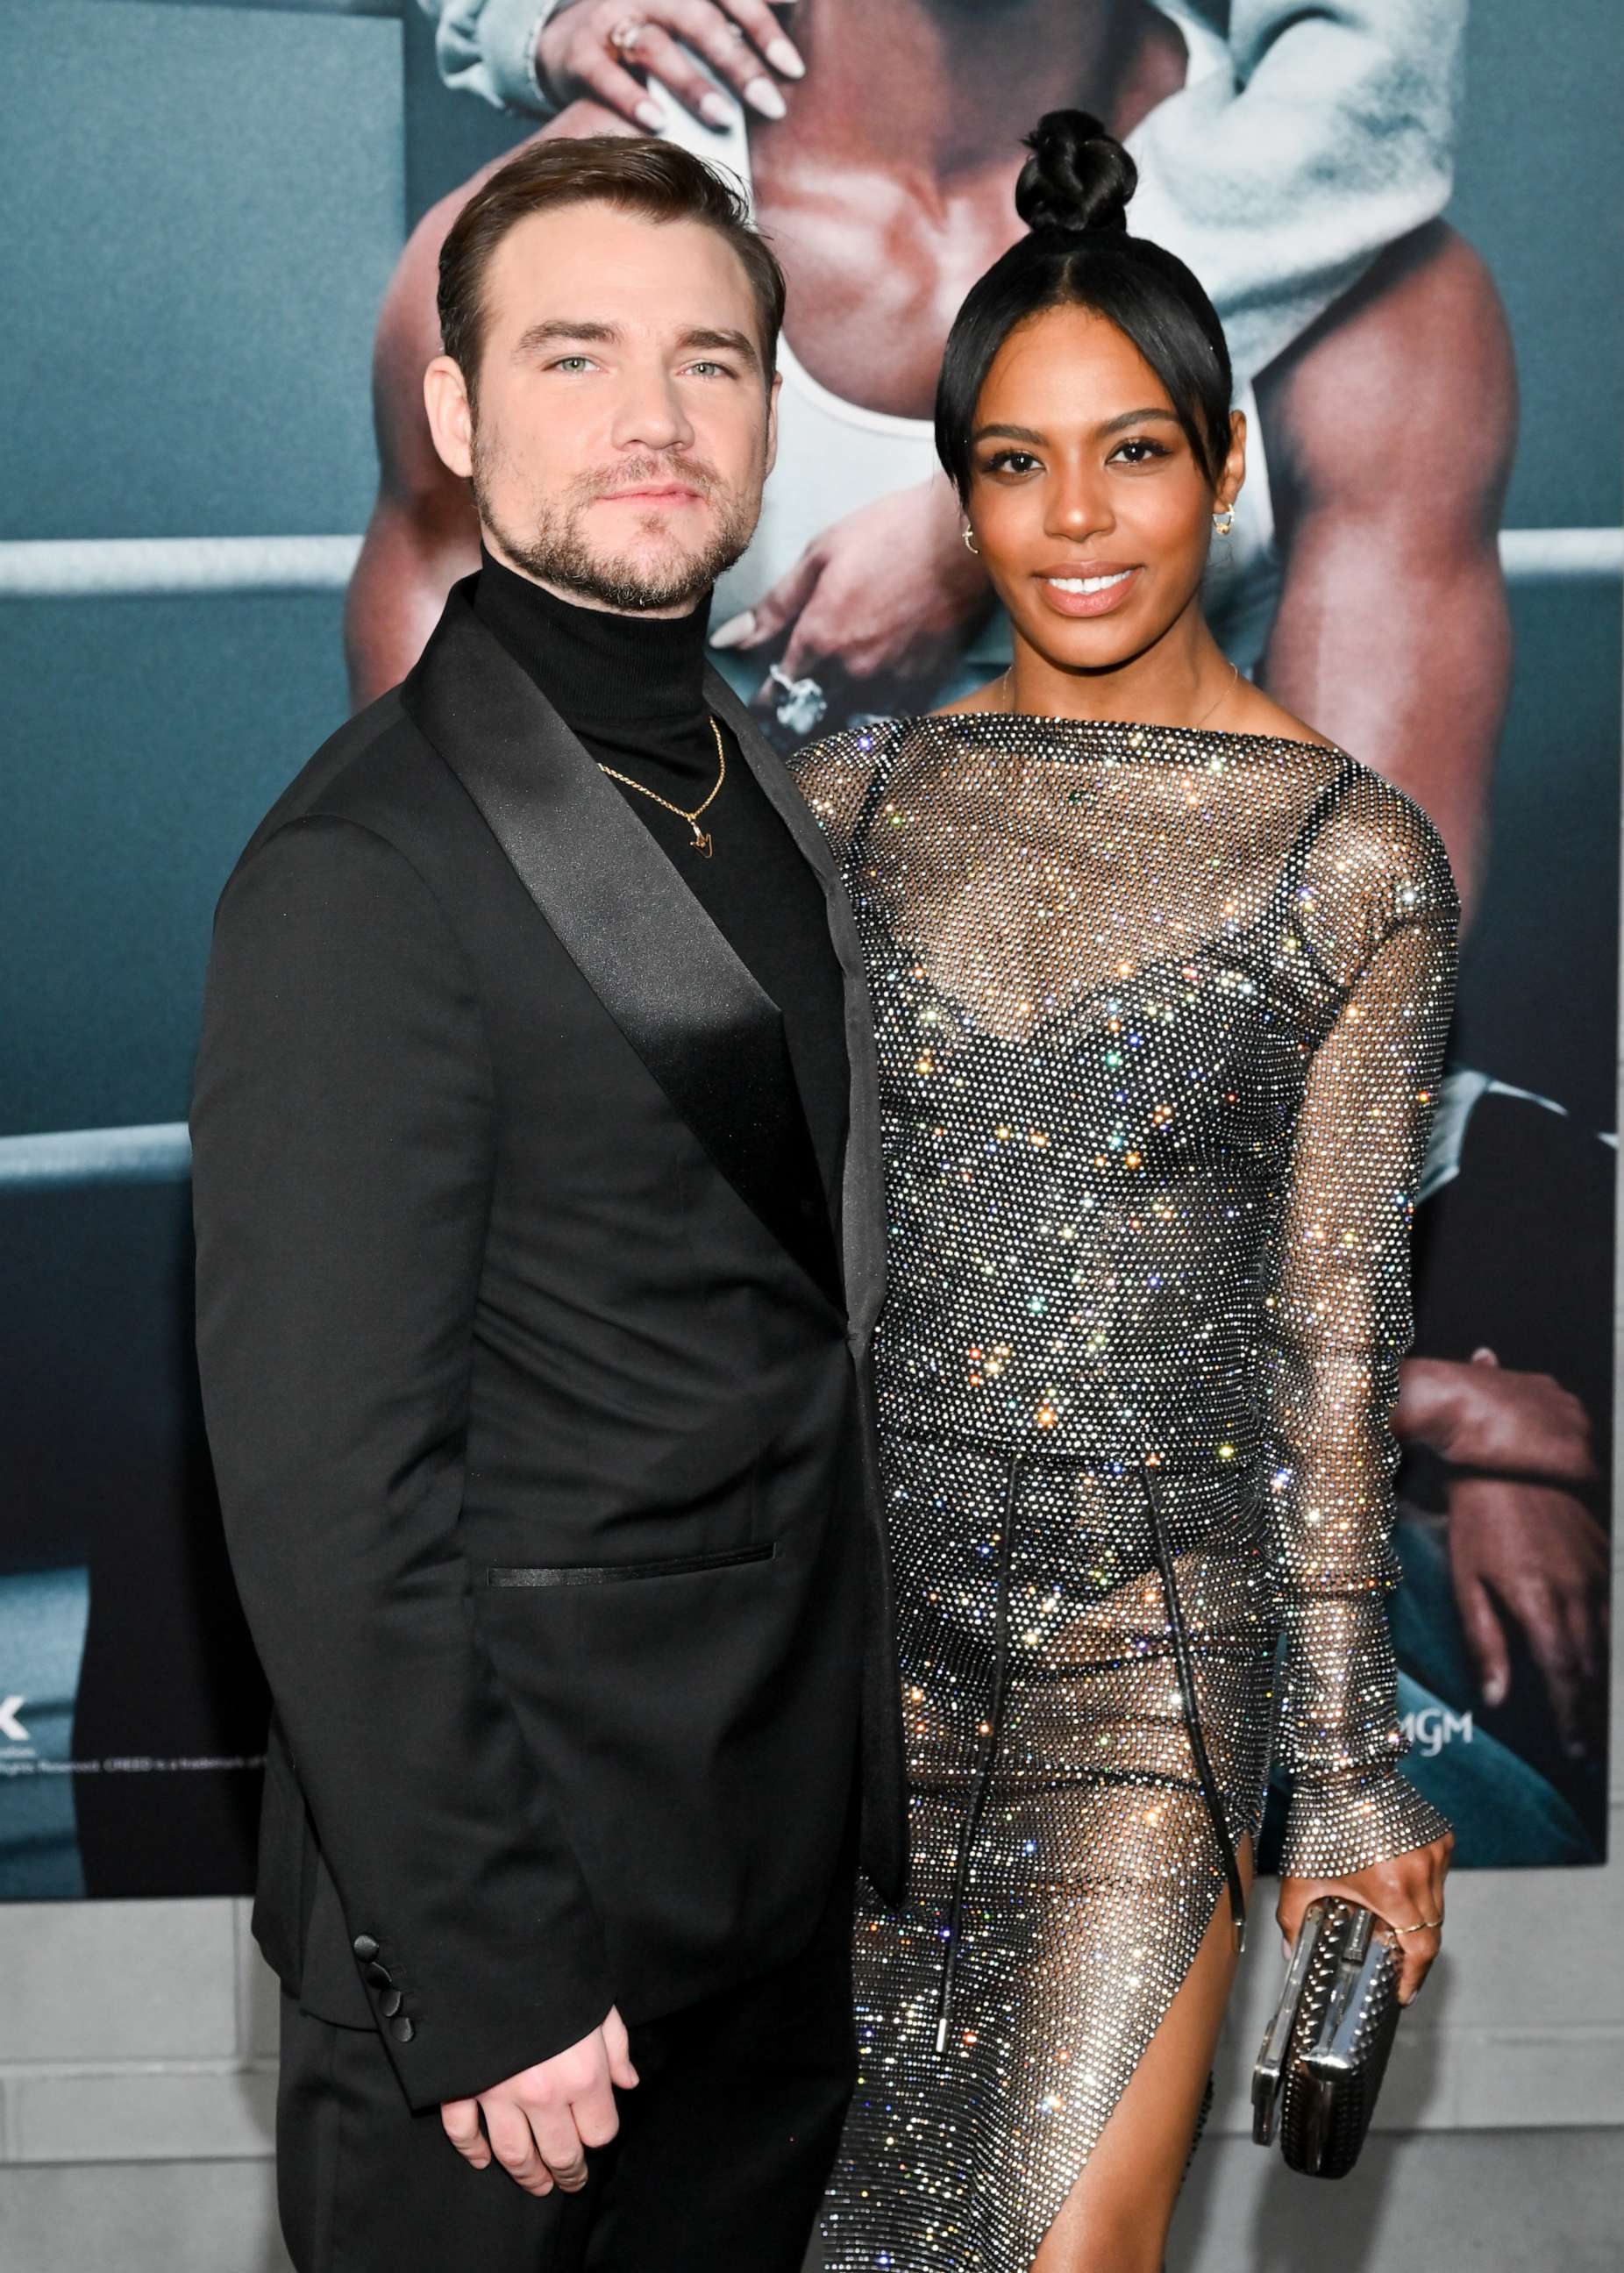 PHOTO: Daniel Durant and Britt Stewart at the premiere of "Creed III" held at TCL Chinese Theater on Feb. 27, 2023 in Los Angeles.